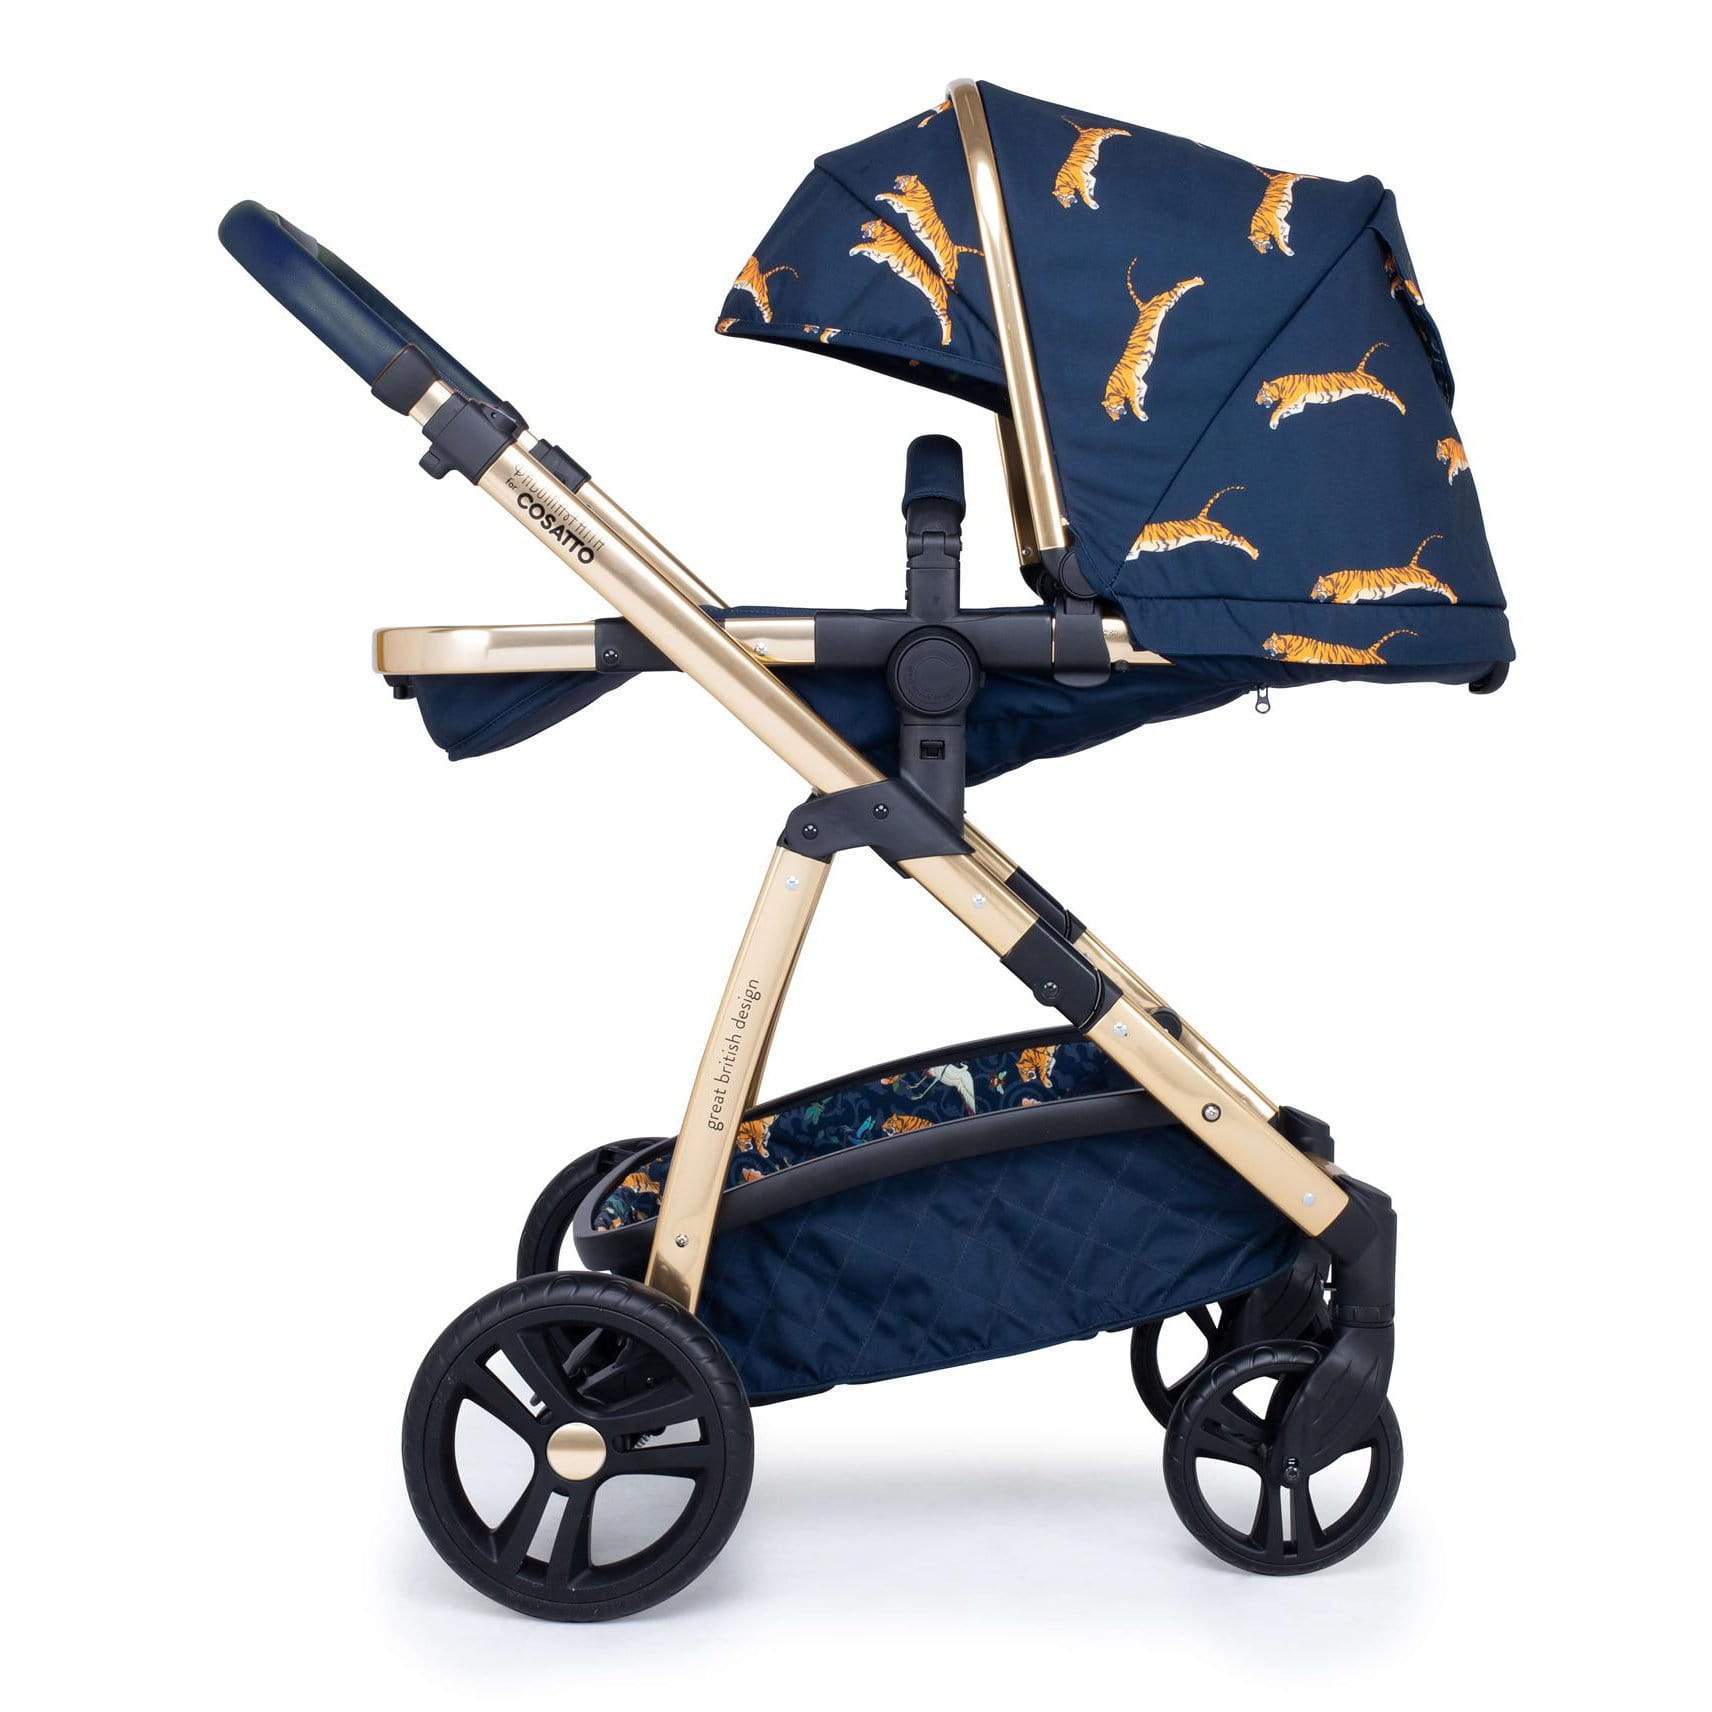 Cosatto Wow Pram & Accessories On The Prowl Baby Prams CT4431 5021645058664